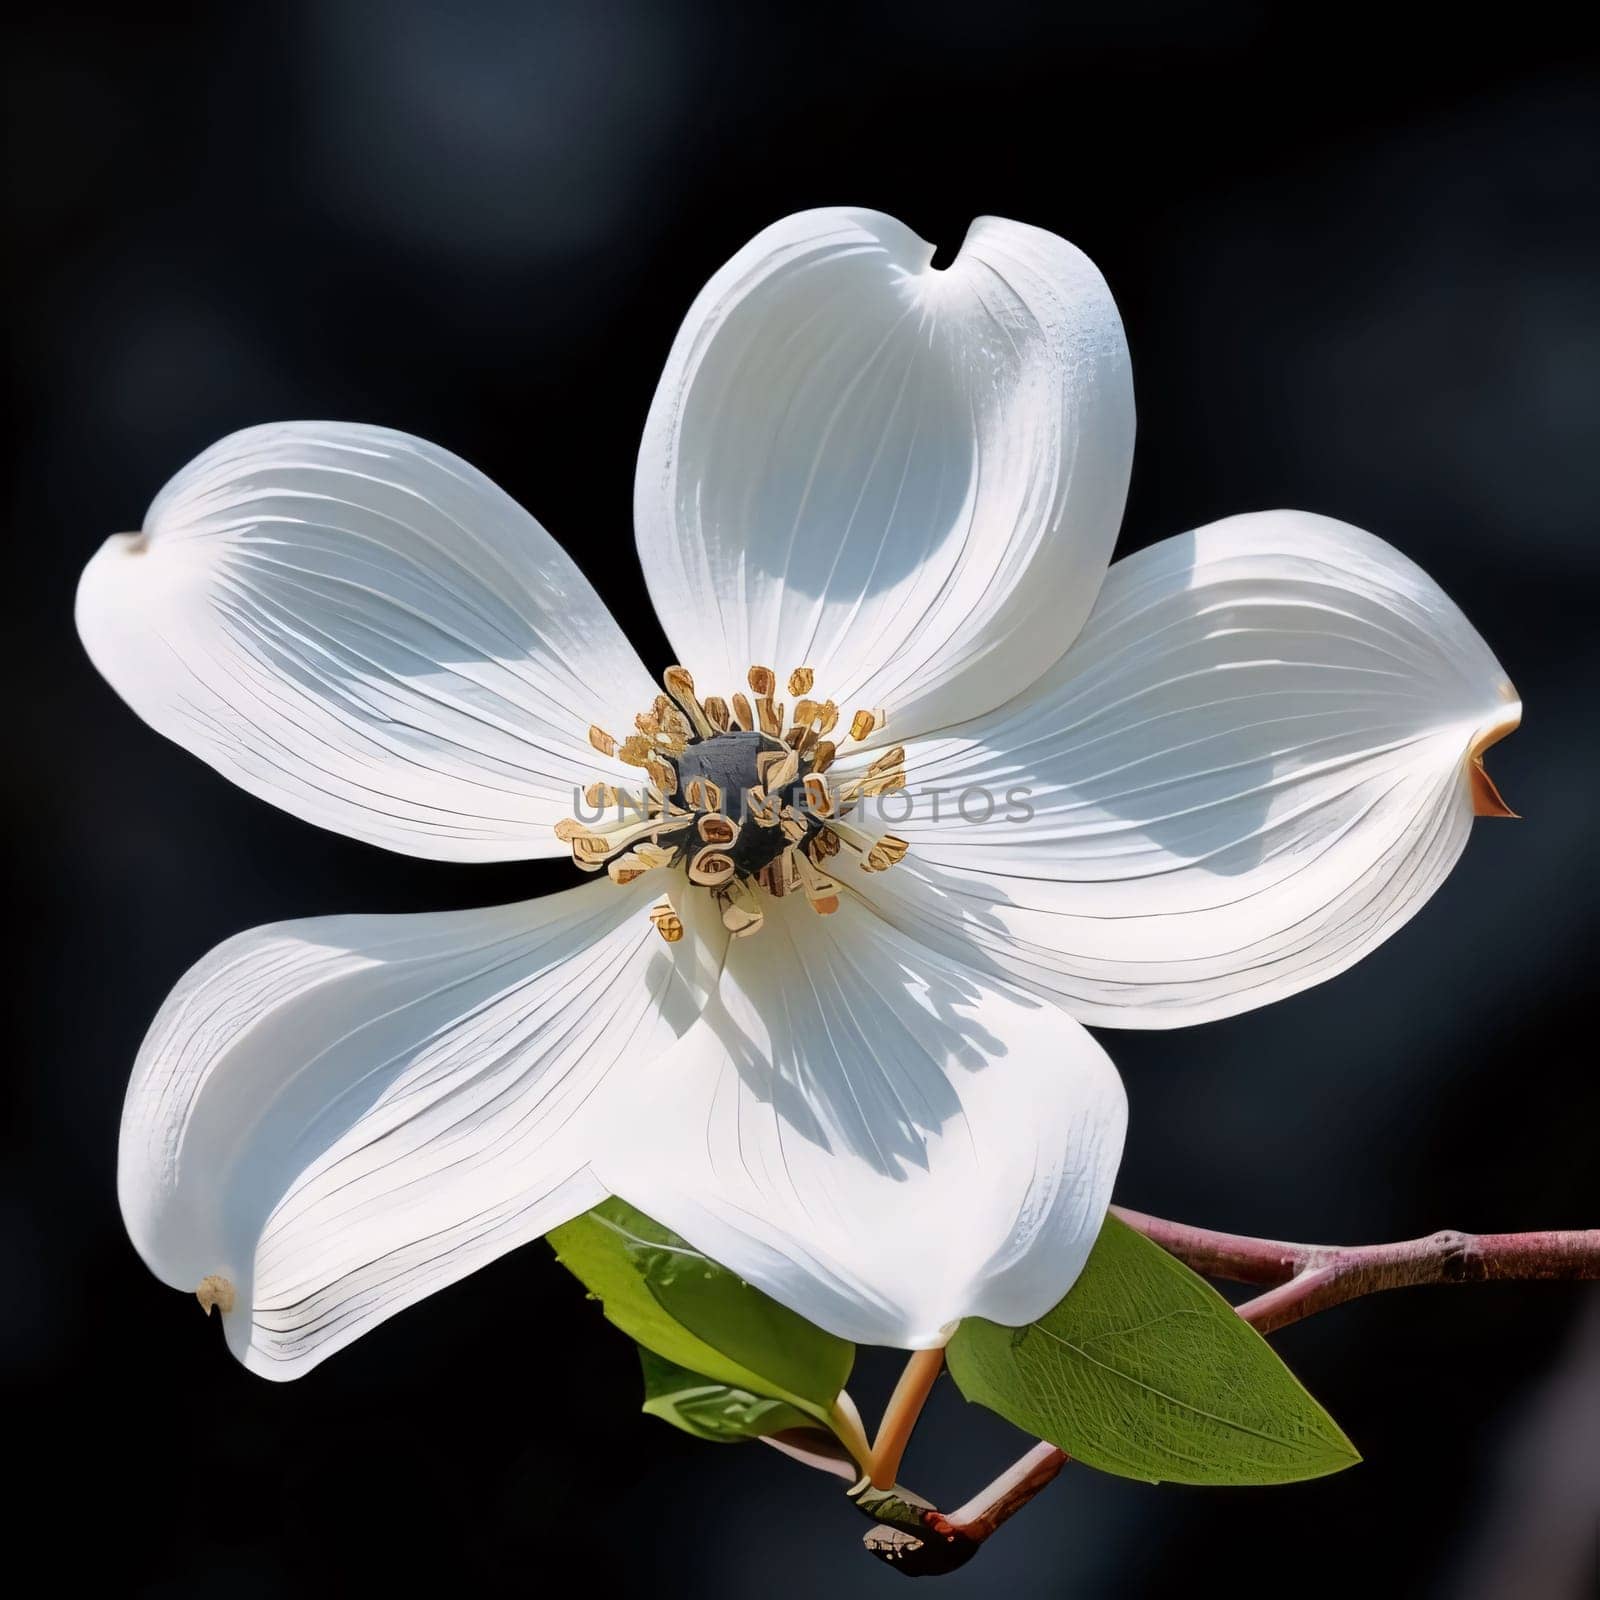 White flower with tiny green leaves, close-up photo on a dark background. Flowering flowers, a symbol of spring, new life. A joyful time of nature waking up to life.